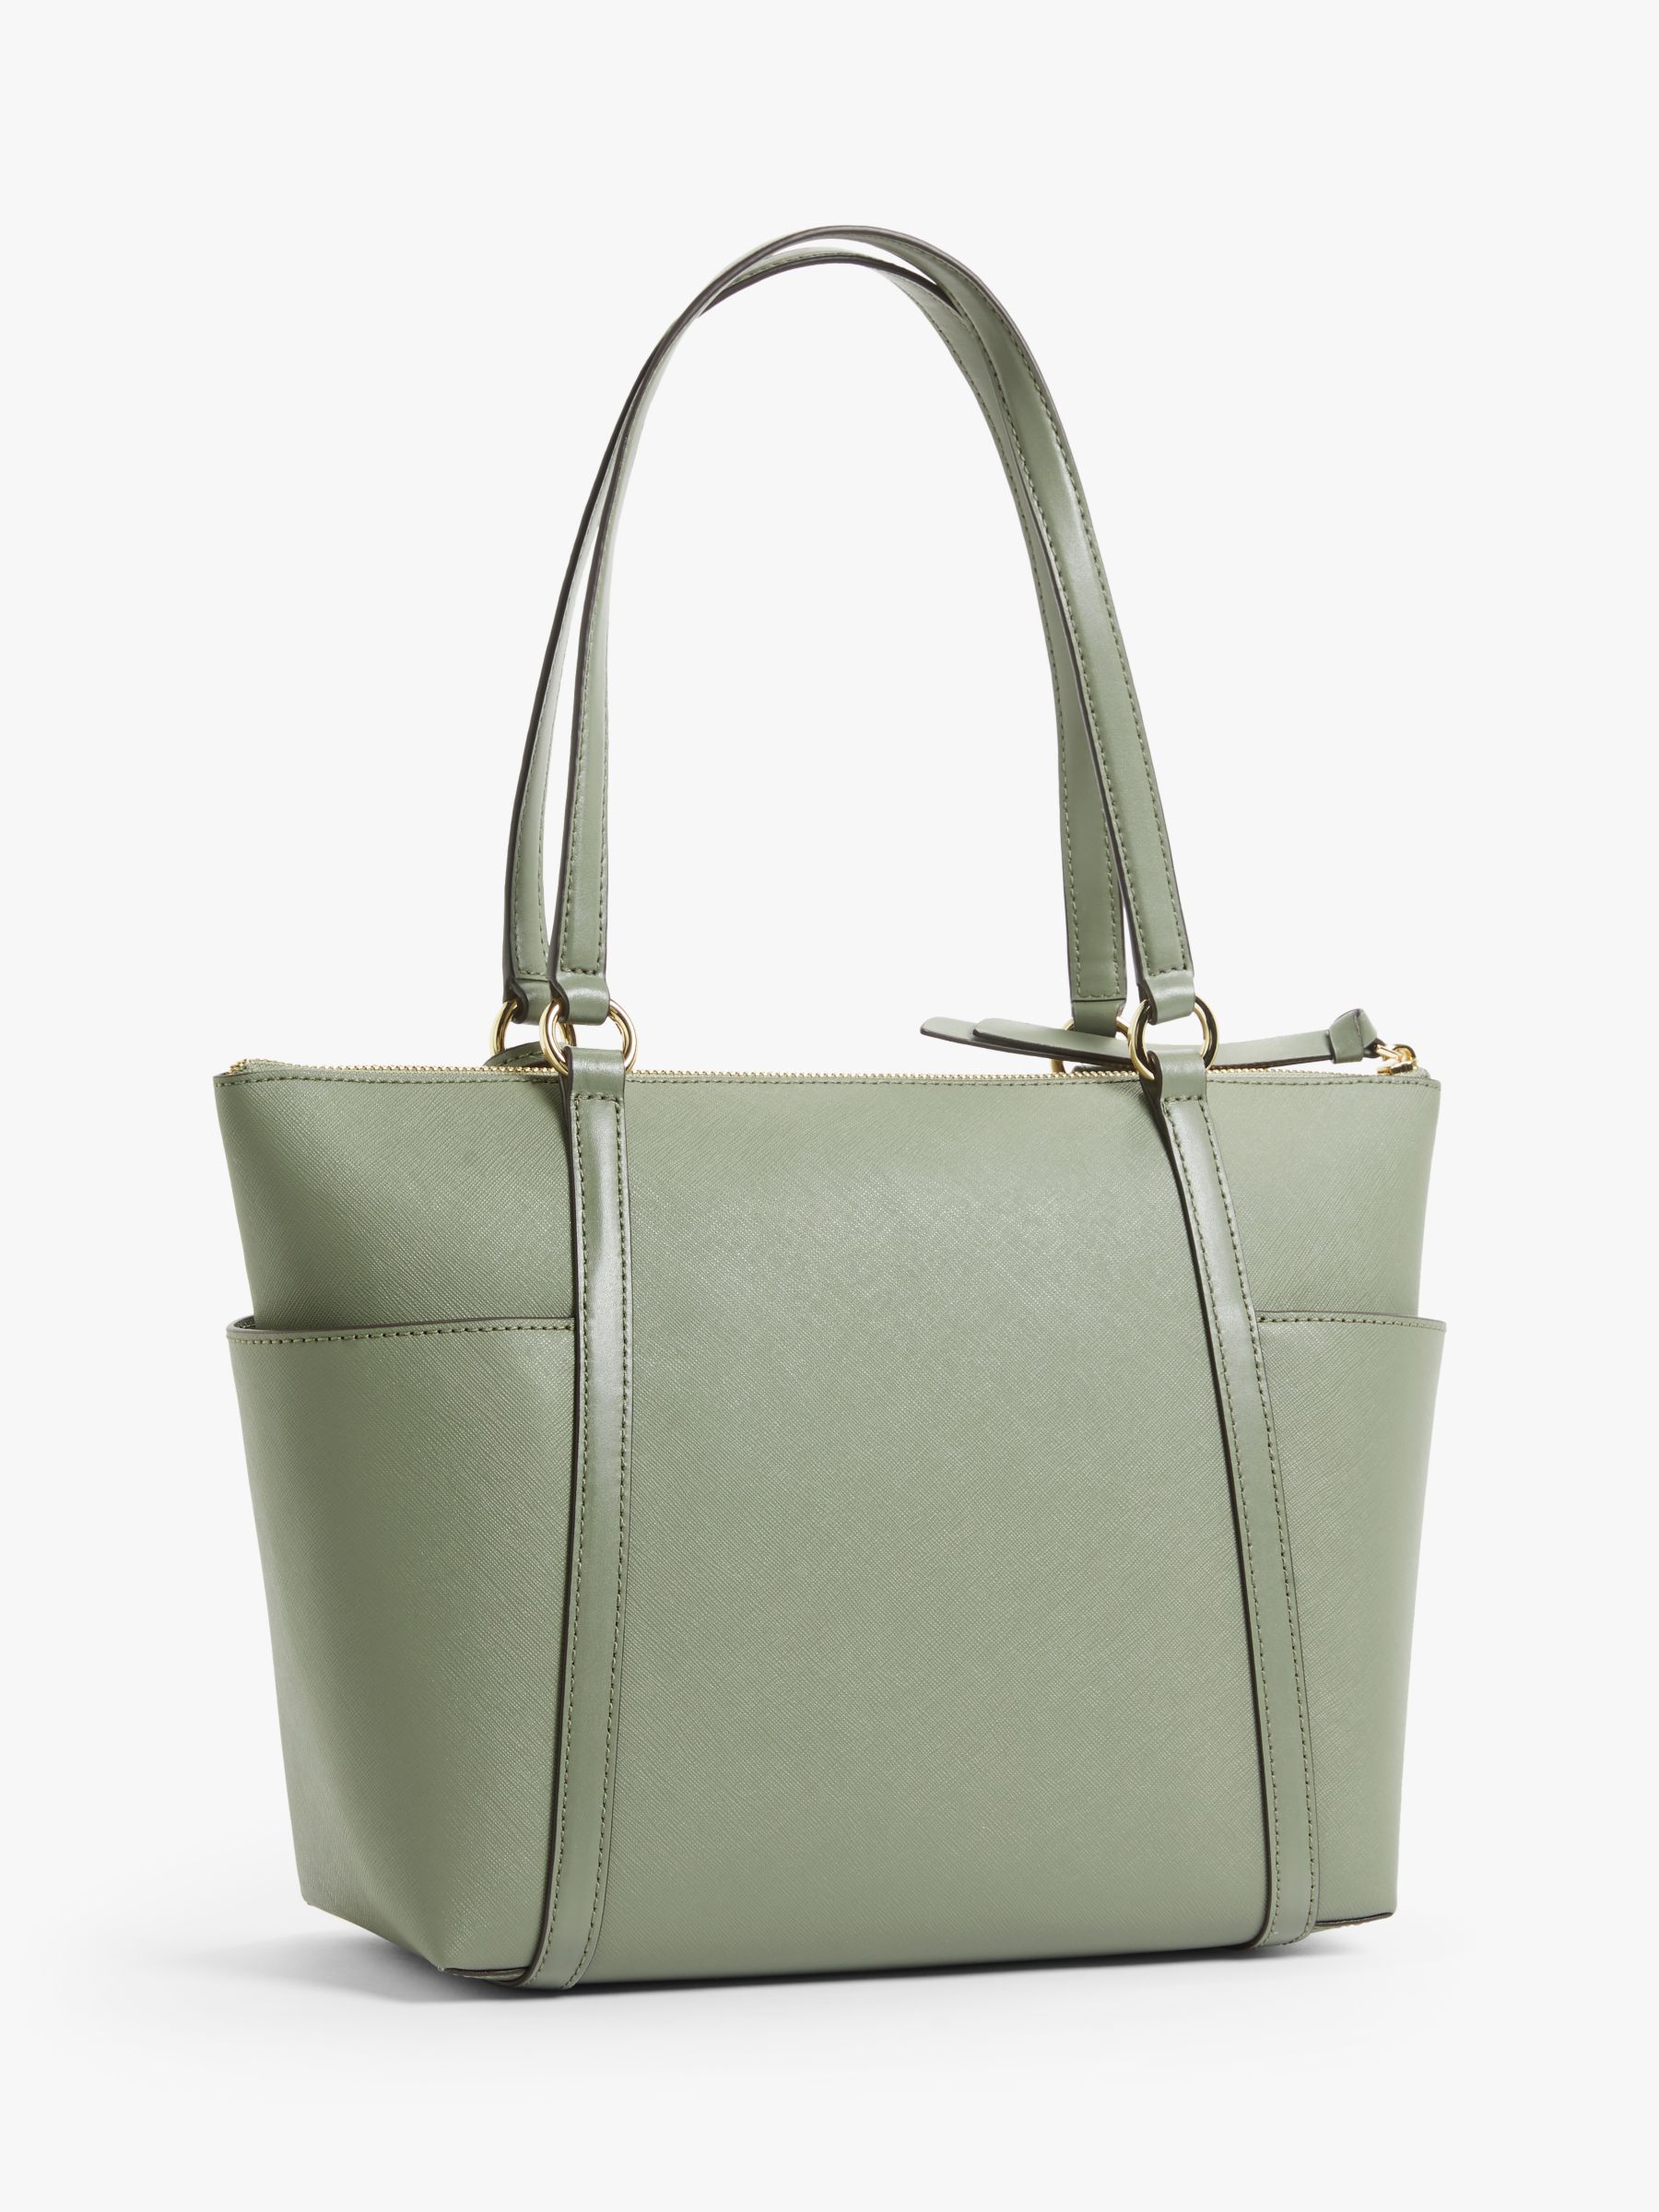 MICHAEL Michael Kors Nomad Leather Tote Bag, Army Green at John Lewis ...